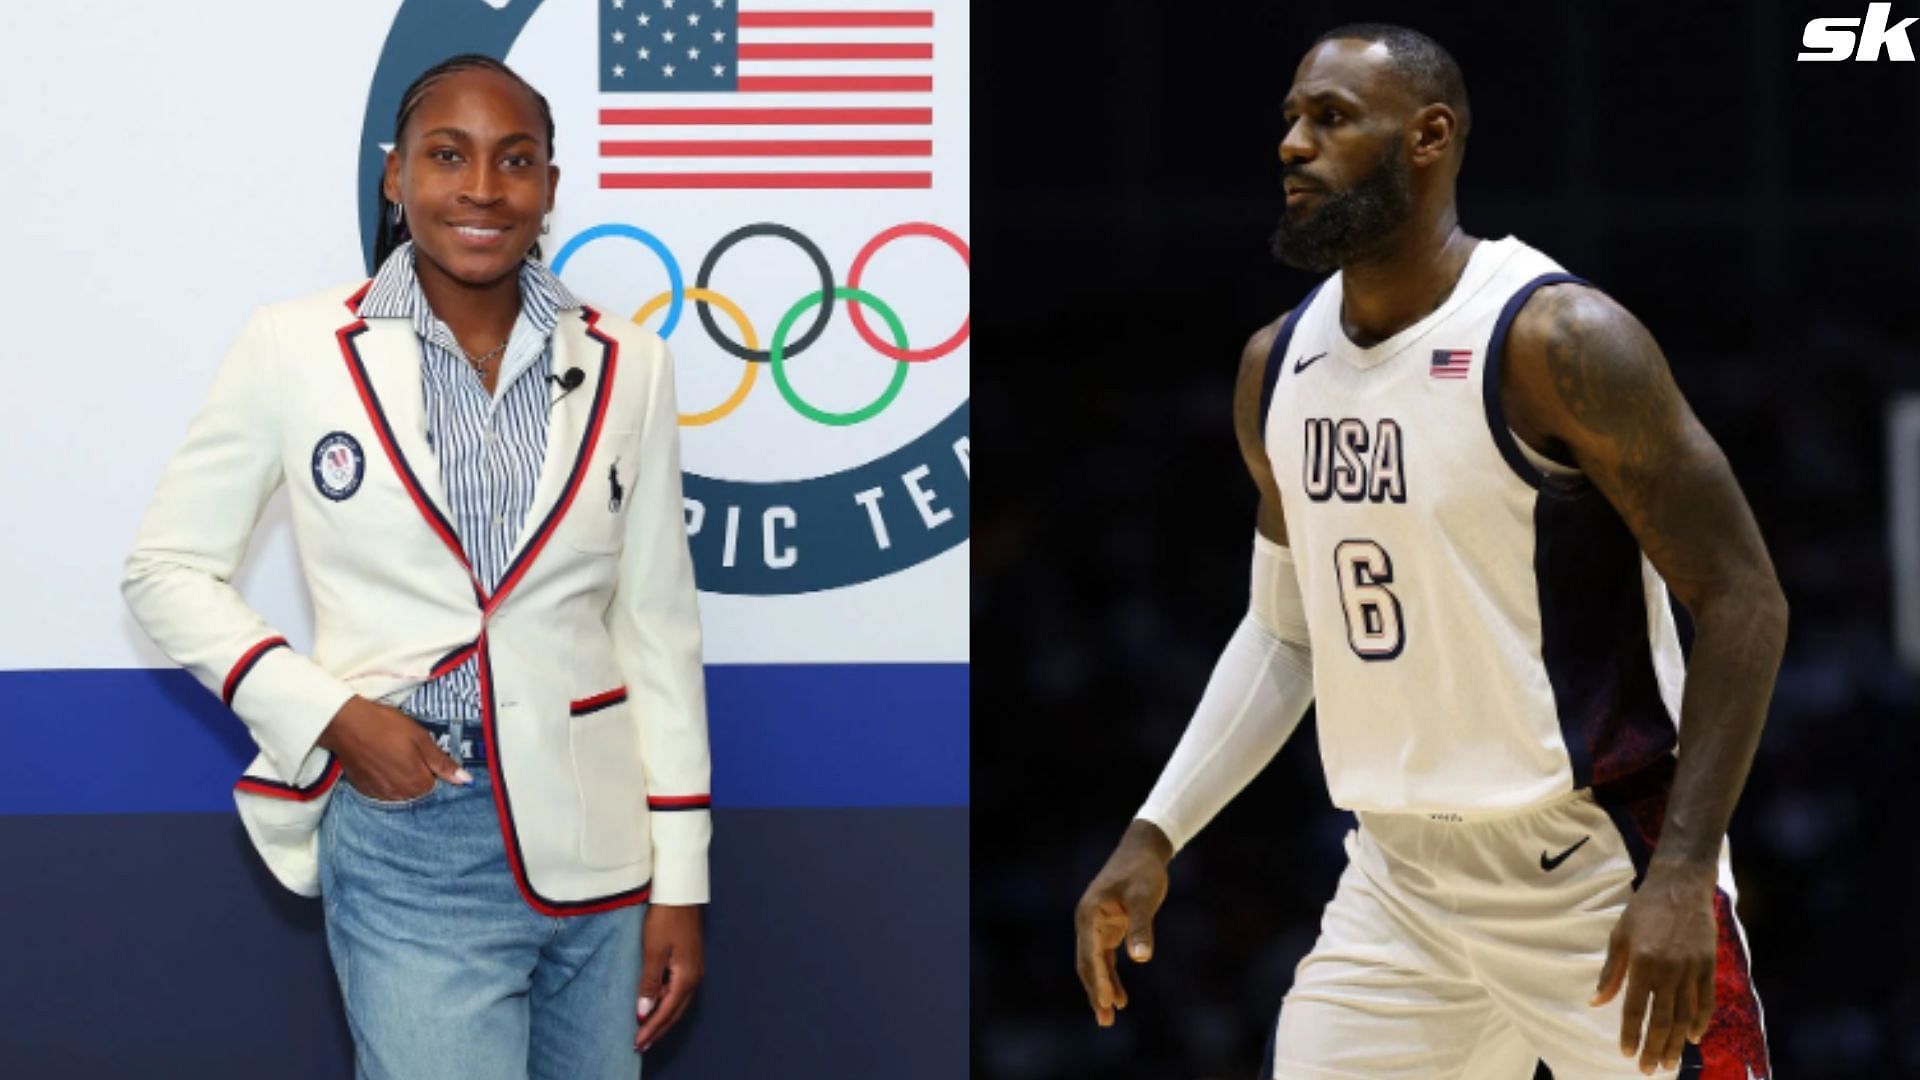 WATCH: Coco Gauff's stunned reaction after finding out for the first time that she will accompany LeBron James as Olympics flag-bearer at Paris 2024